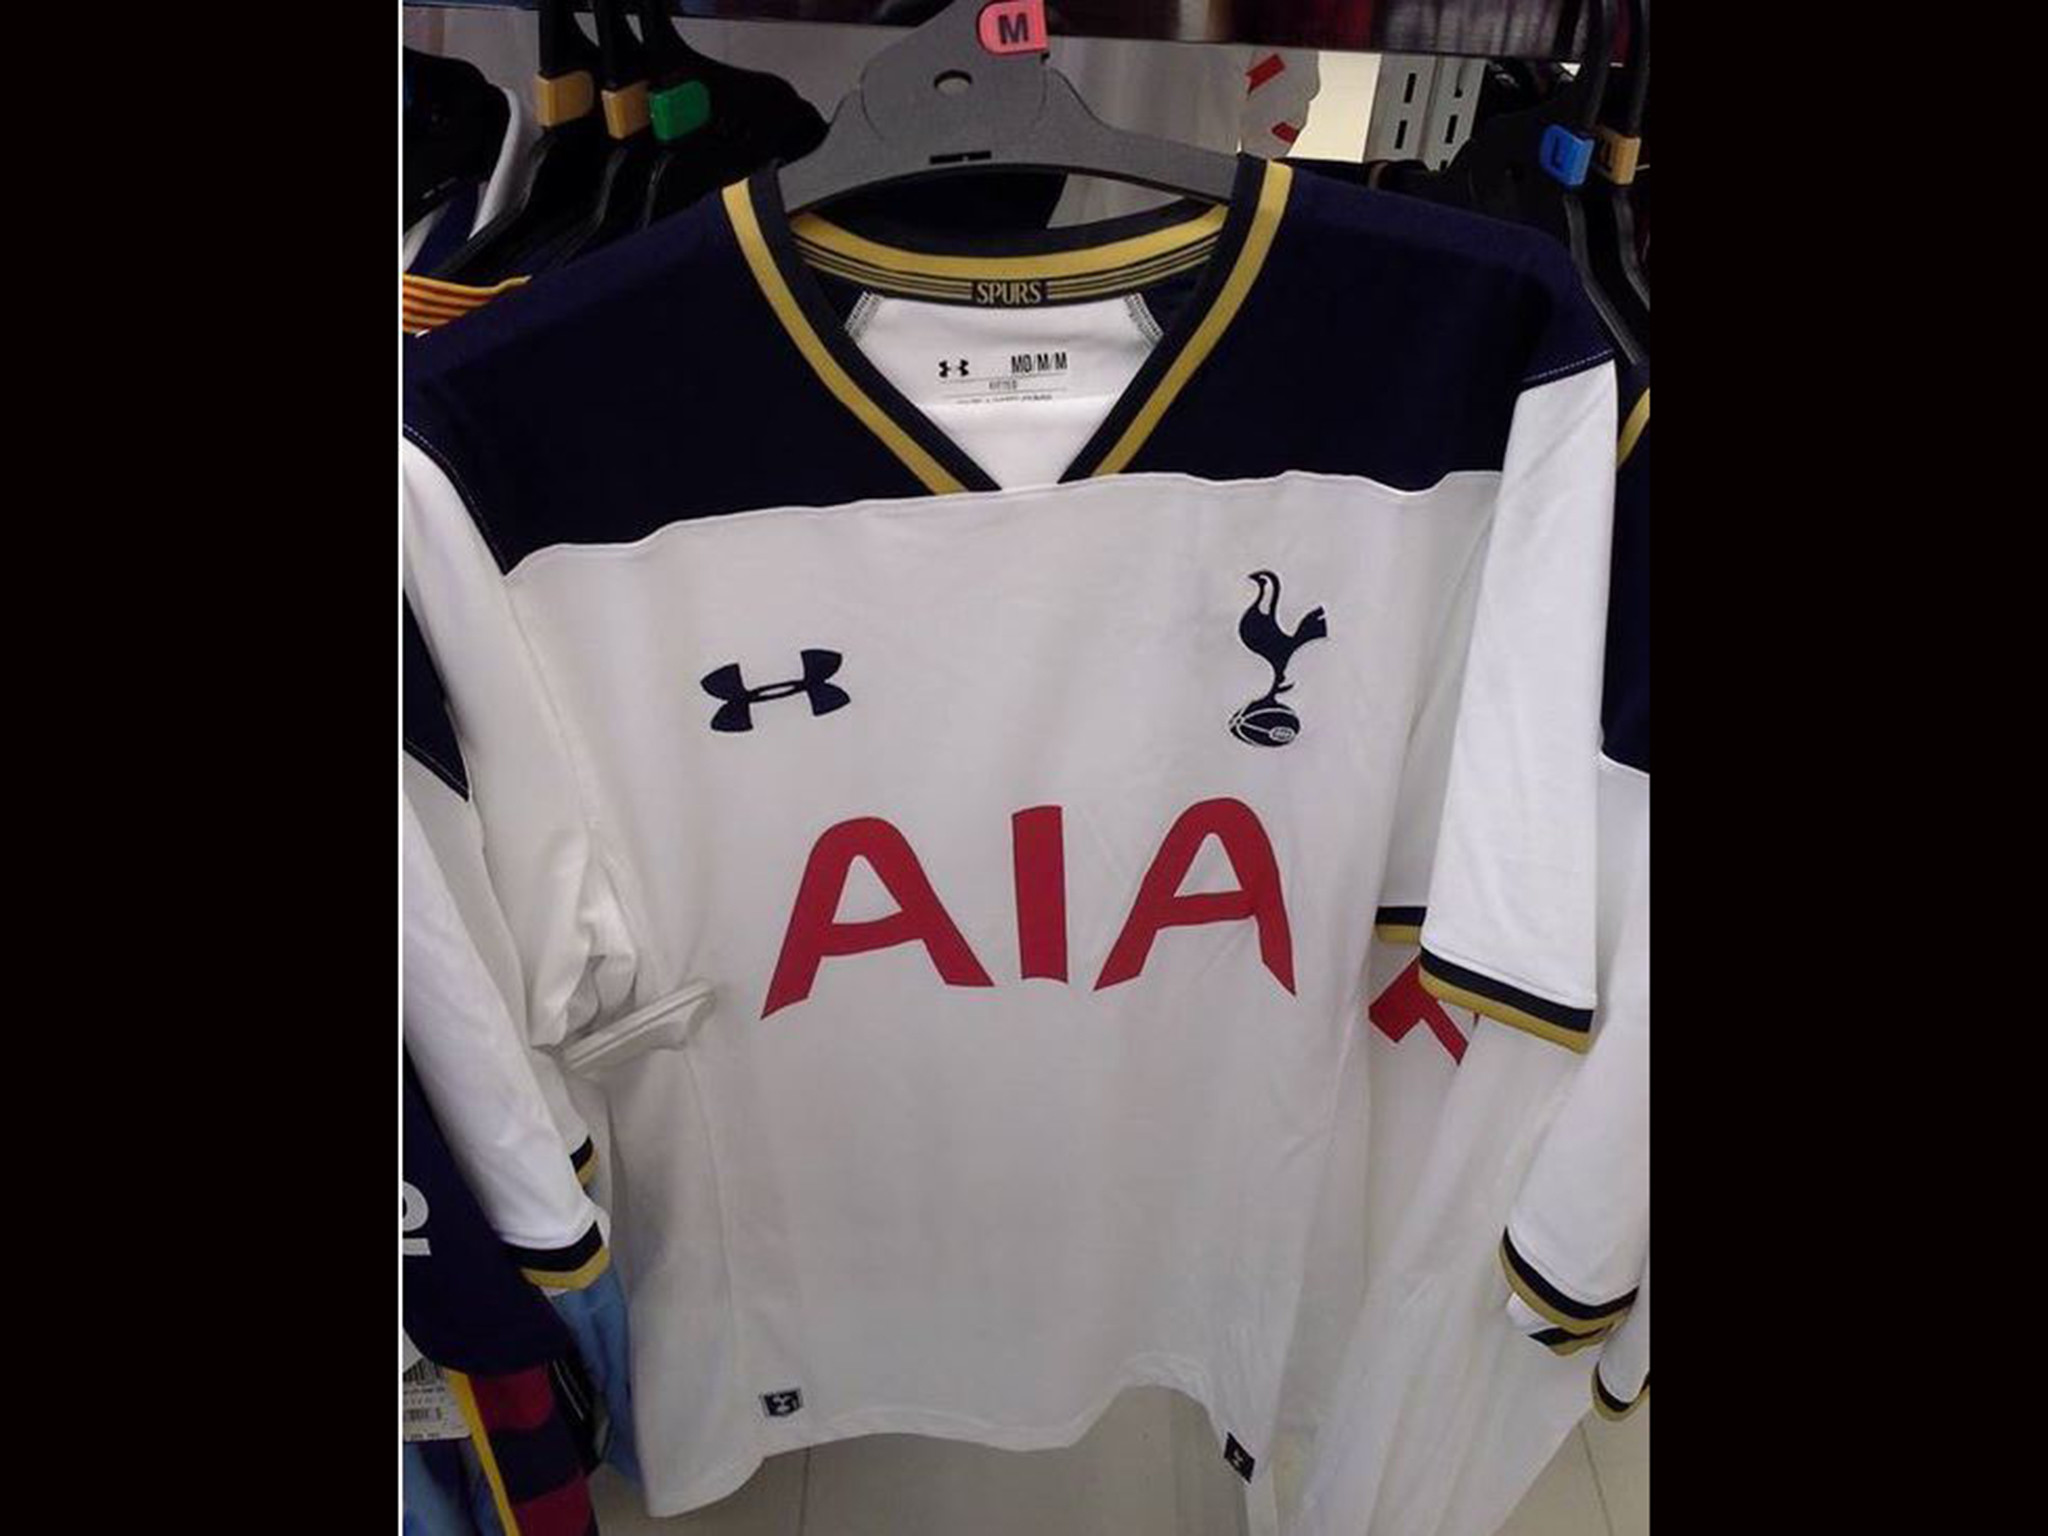 2048x1536 Tottenham kit leak: Spurs jersey spotted in a shop in Australia | The  Independent